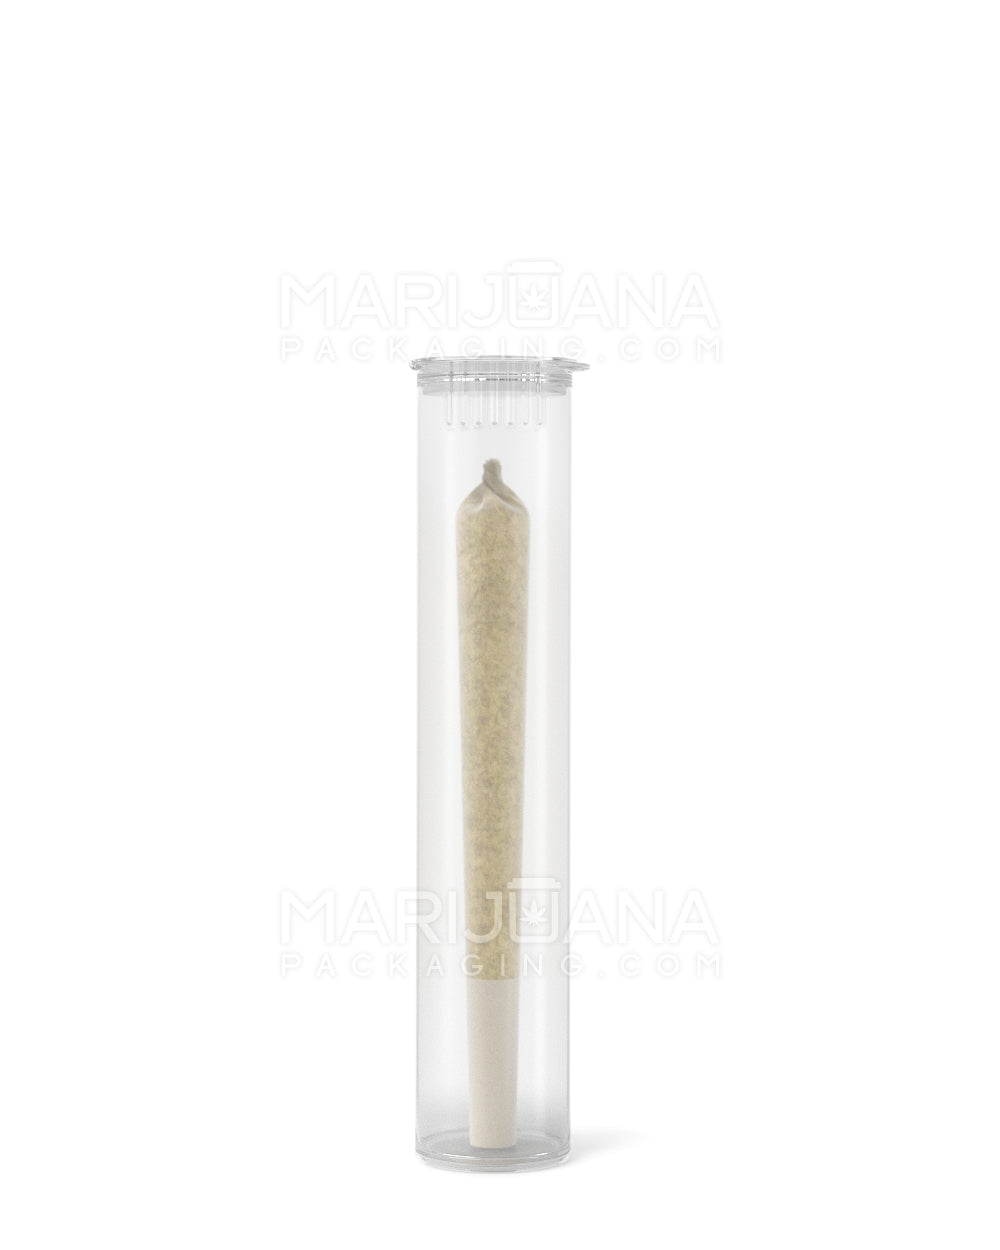 Child Resistant & Sustainable | 100% Biodegradable Pop Top Plastic Pre-Roll Tubes | 95mm - Clear - 1000 Count - 2